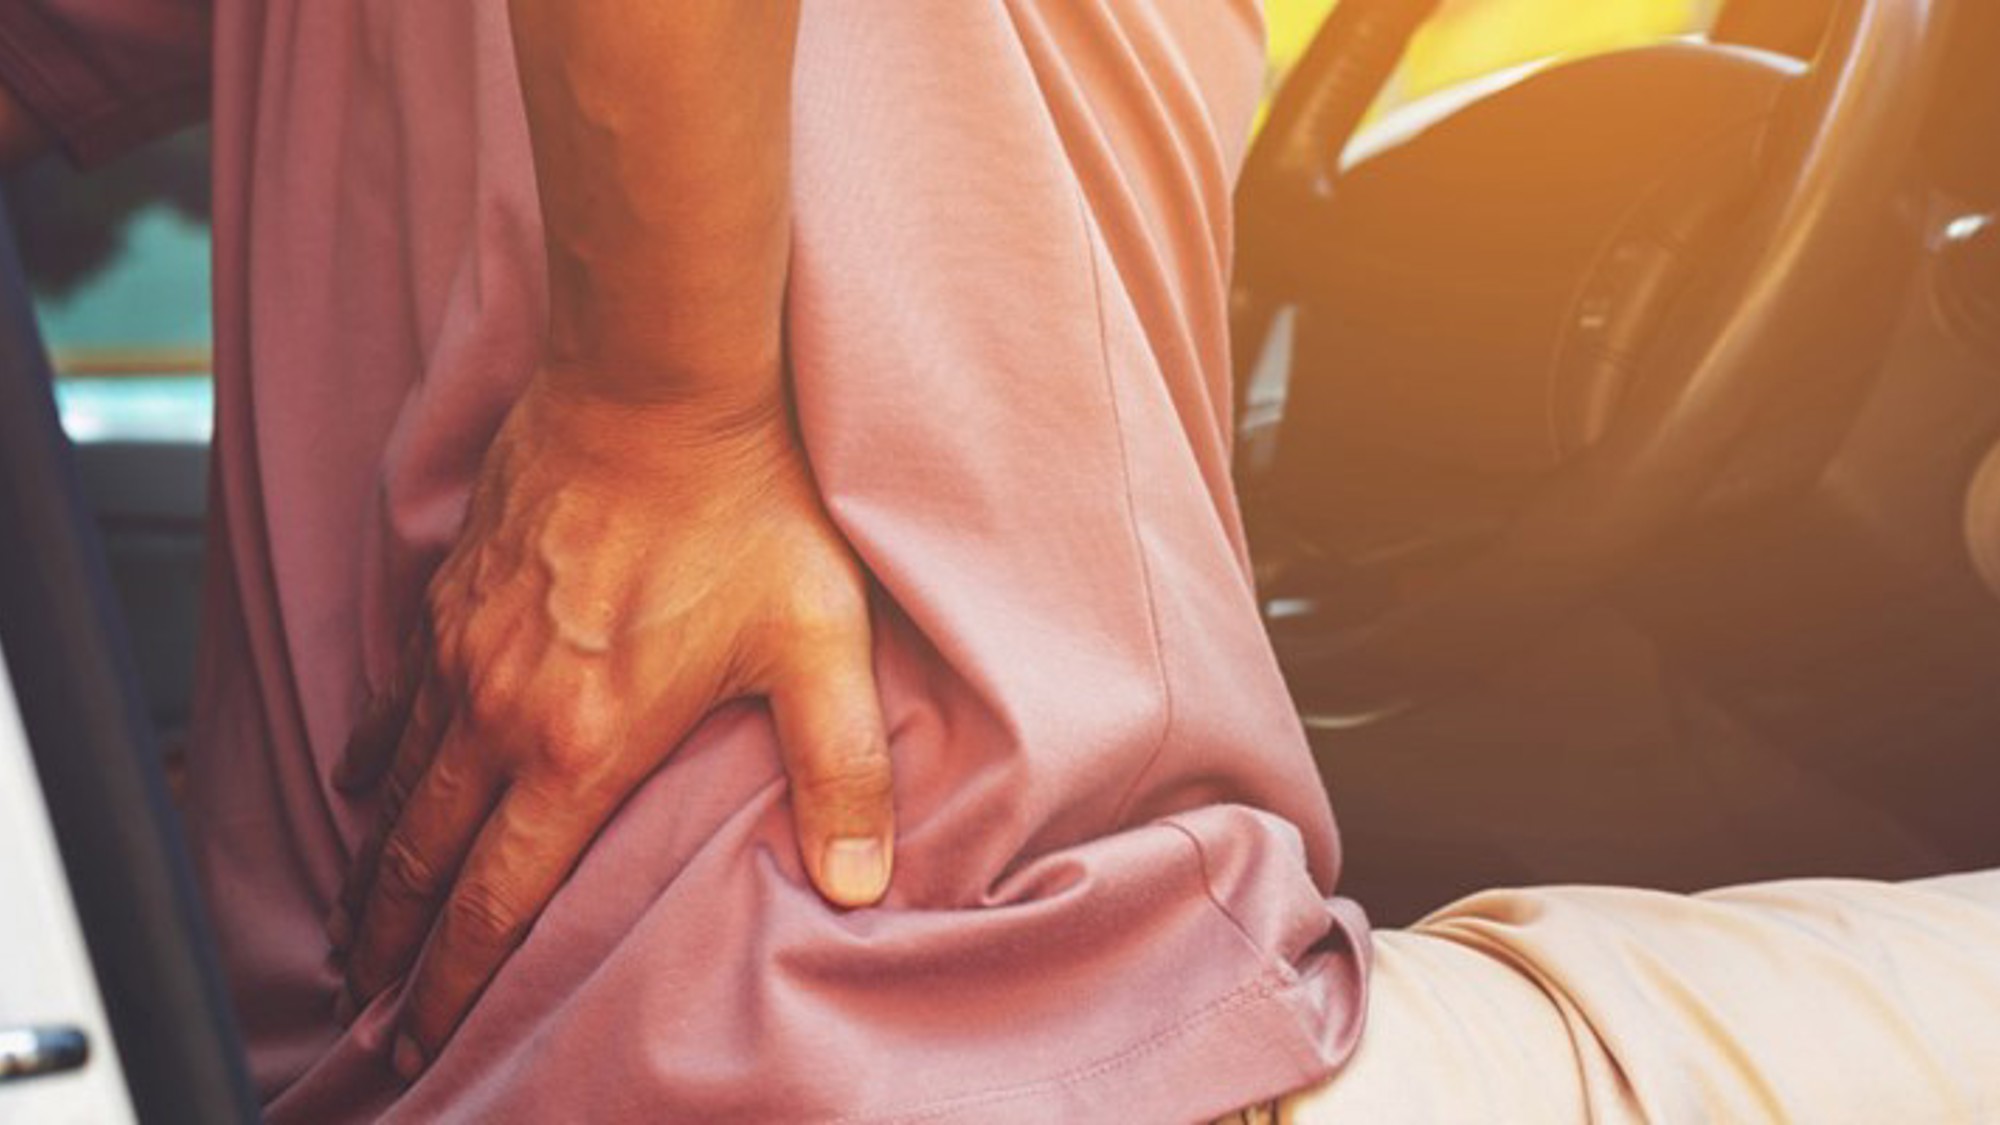 12 Ways to Reduce Lower Back Pain When Driving